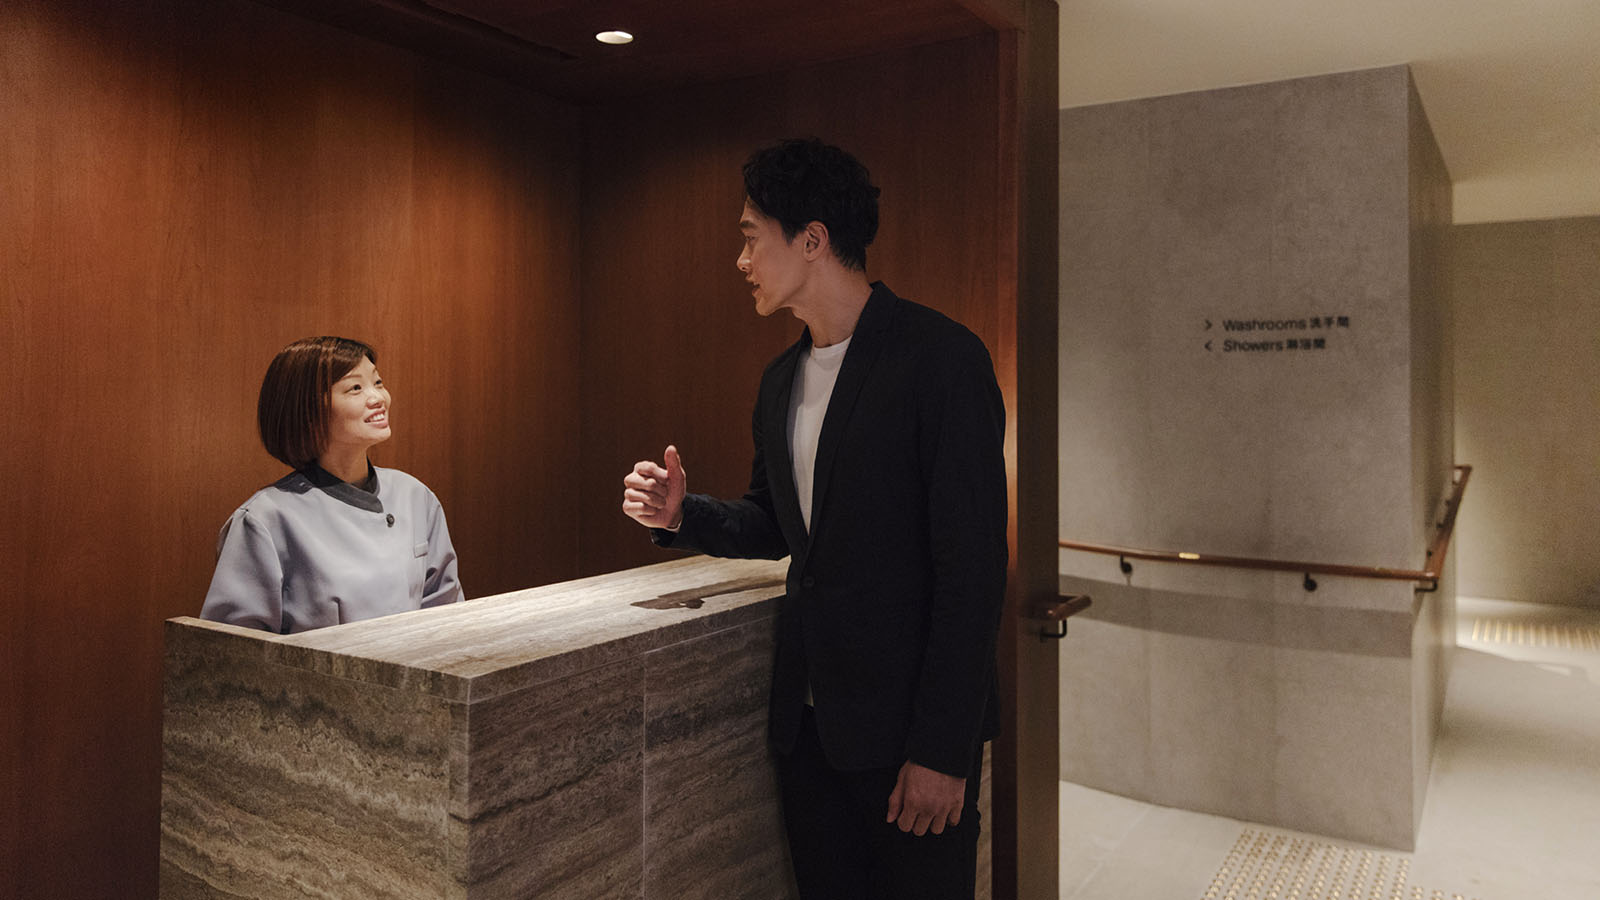 Shower suites in Cathay Pacific's The Deck lounge